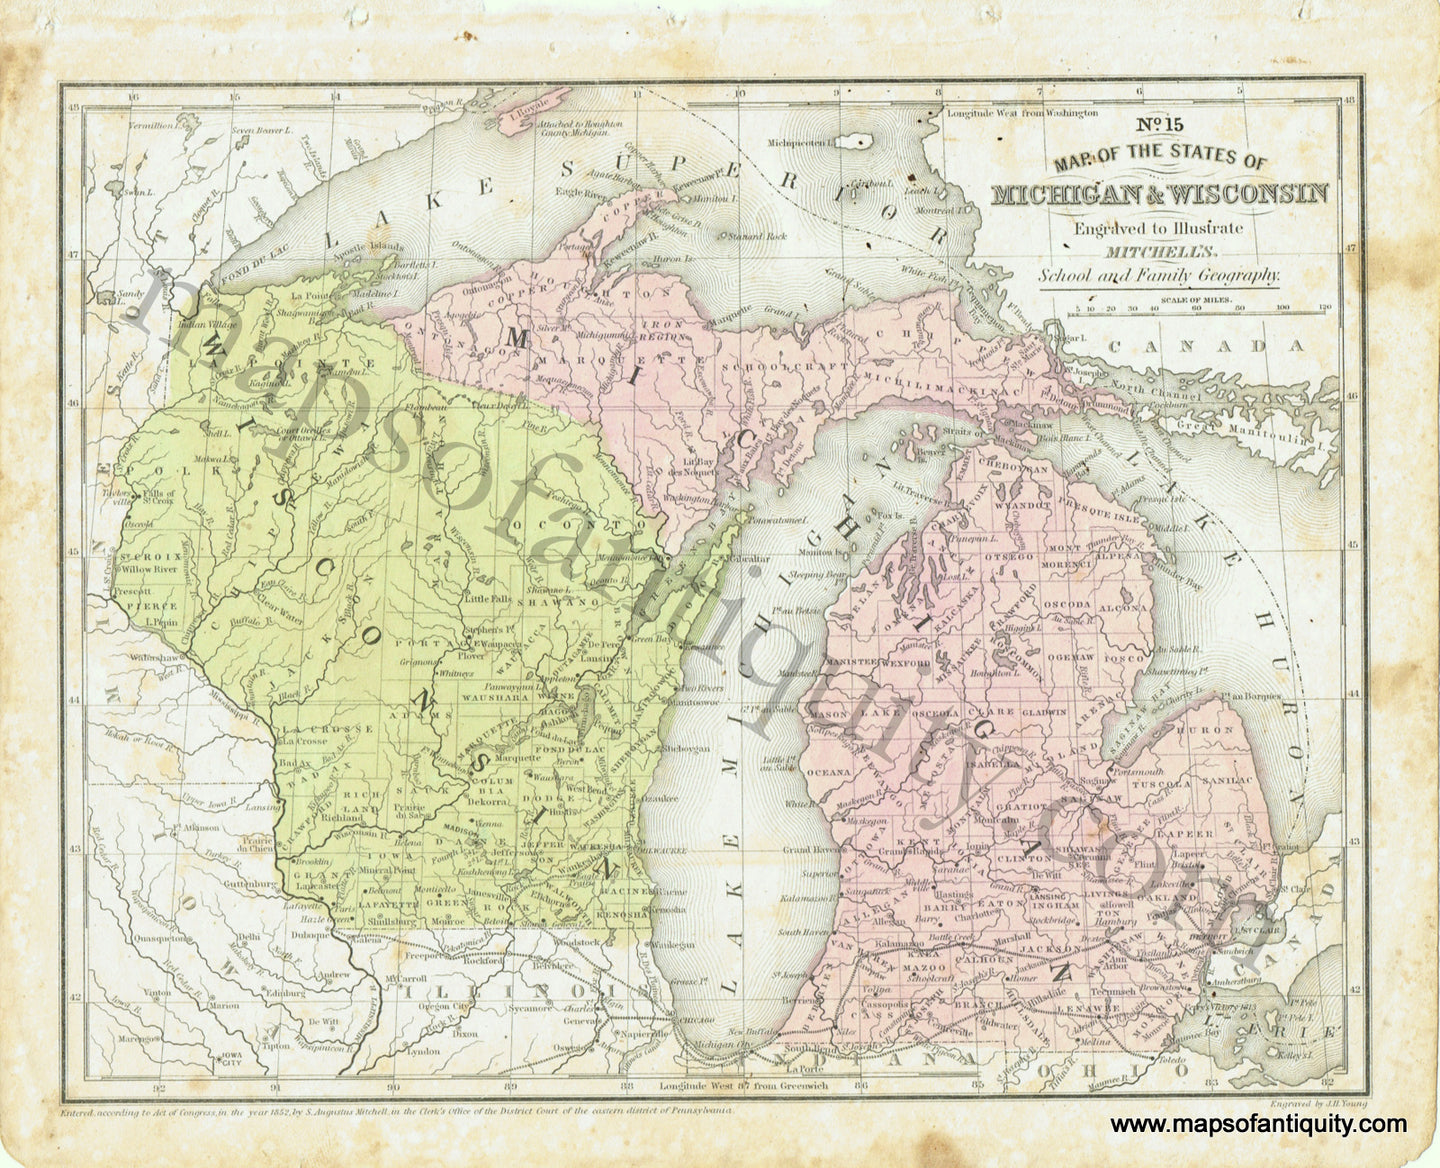 Antique-Hand-Colored-Map-No.-15-Map-of-the-States-of-Michigan-&-Wisconsin-United-States-Midwest-1854-Mitchell-Maps-Of-Antiquity